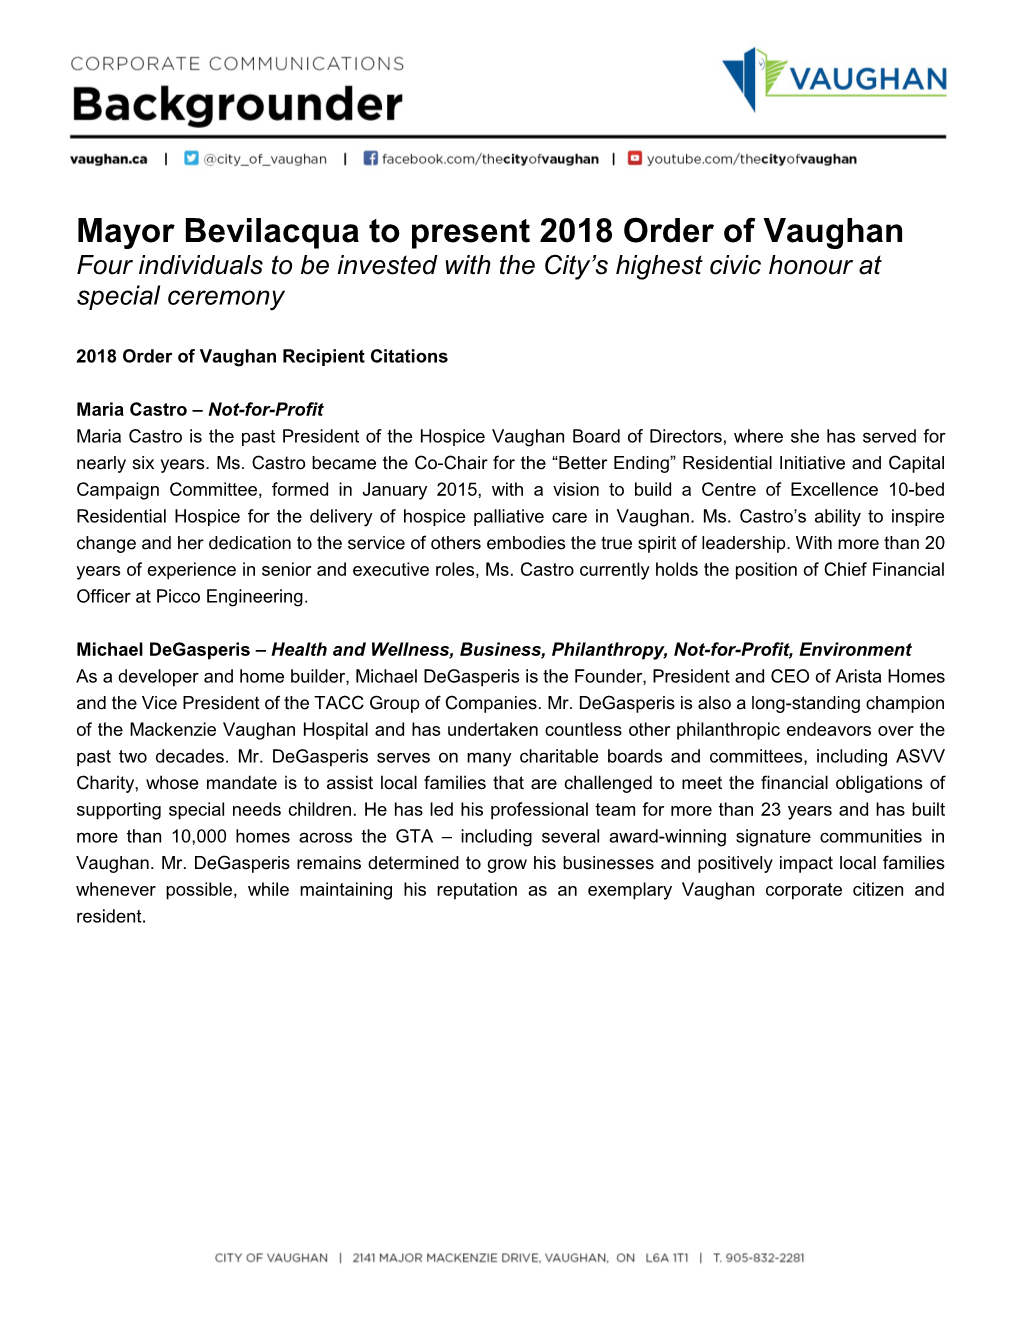 Mayor Bevilacqua to Present 2018 Order of Vaughan Four Individuals to Be Invested with the City’S Highest Civic Honour at Special Ceremony